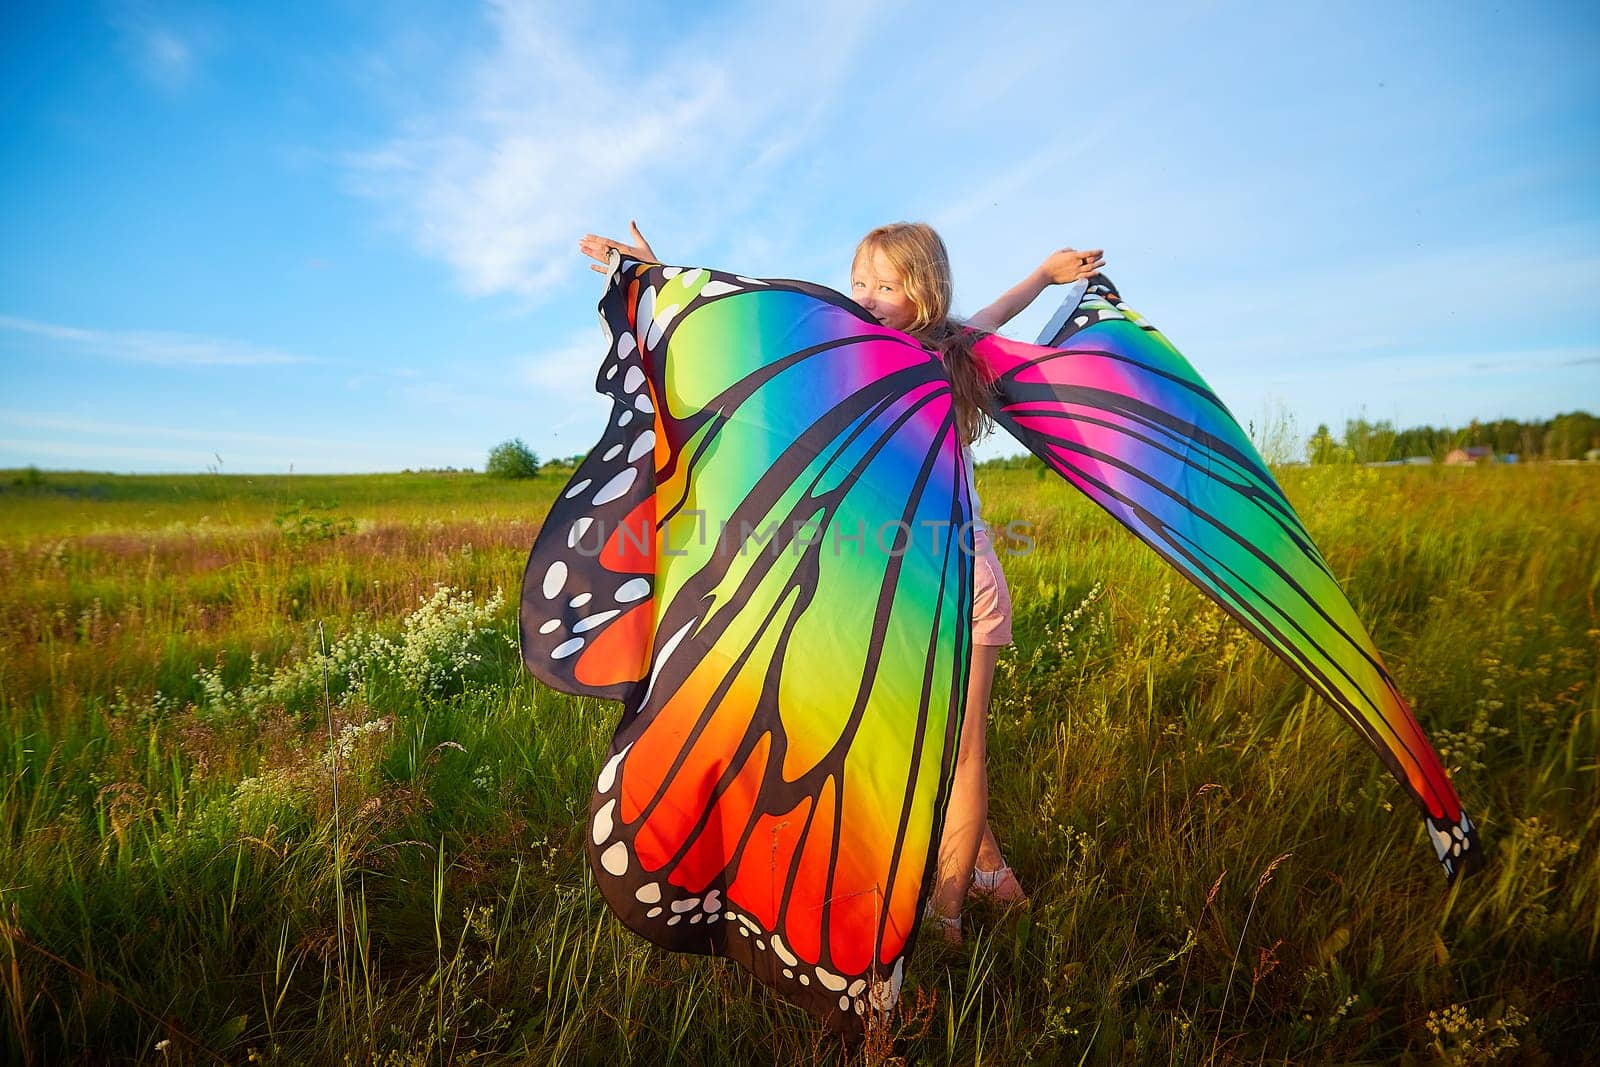 Pretty blonde girl with bright butterfly wings having fun in meadow on natural landscape with grass and flowers on sunny summer day. Portrait of teenage child in spring season outdoors on field